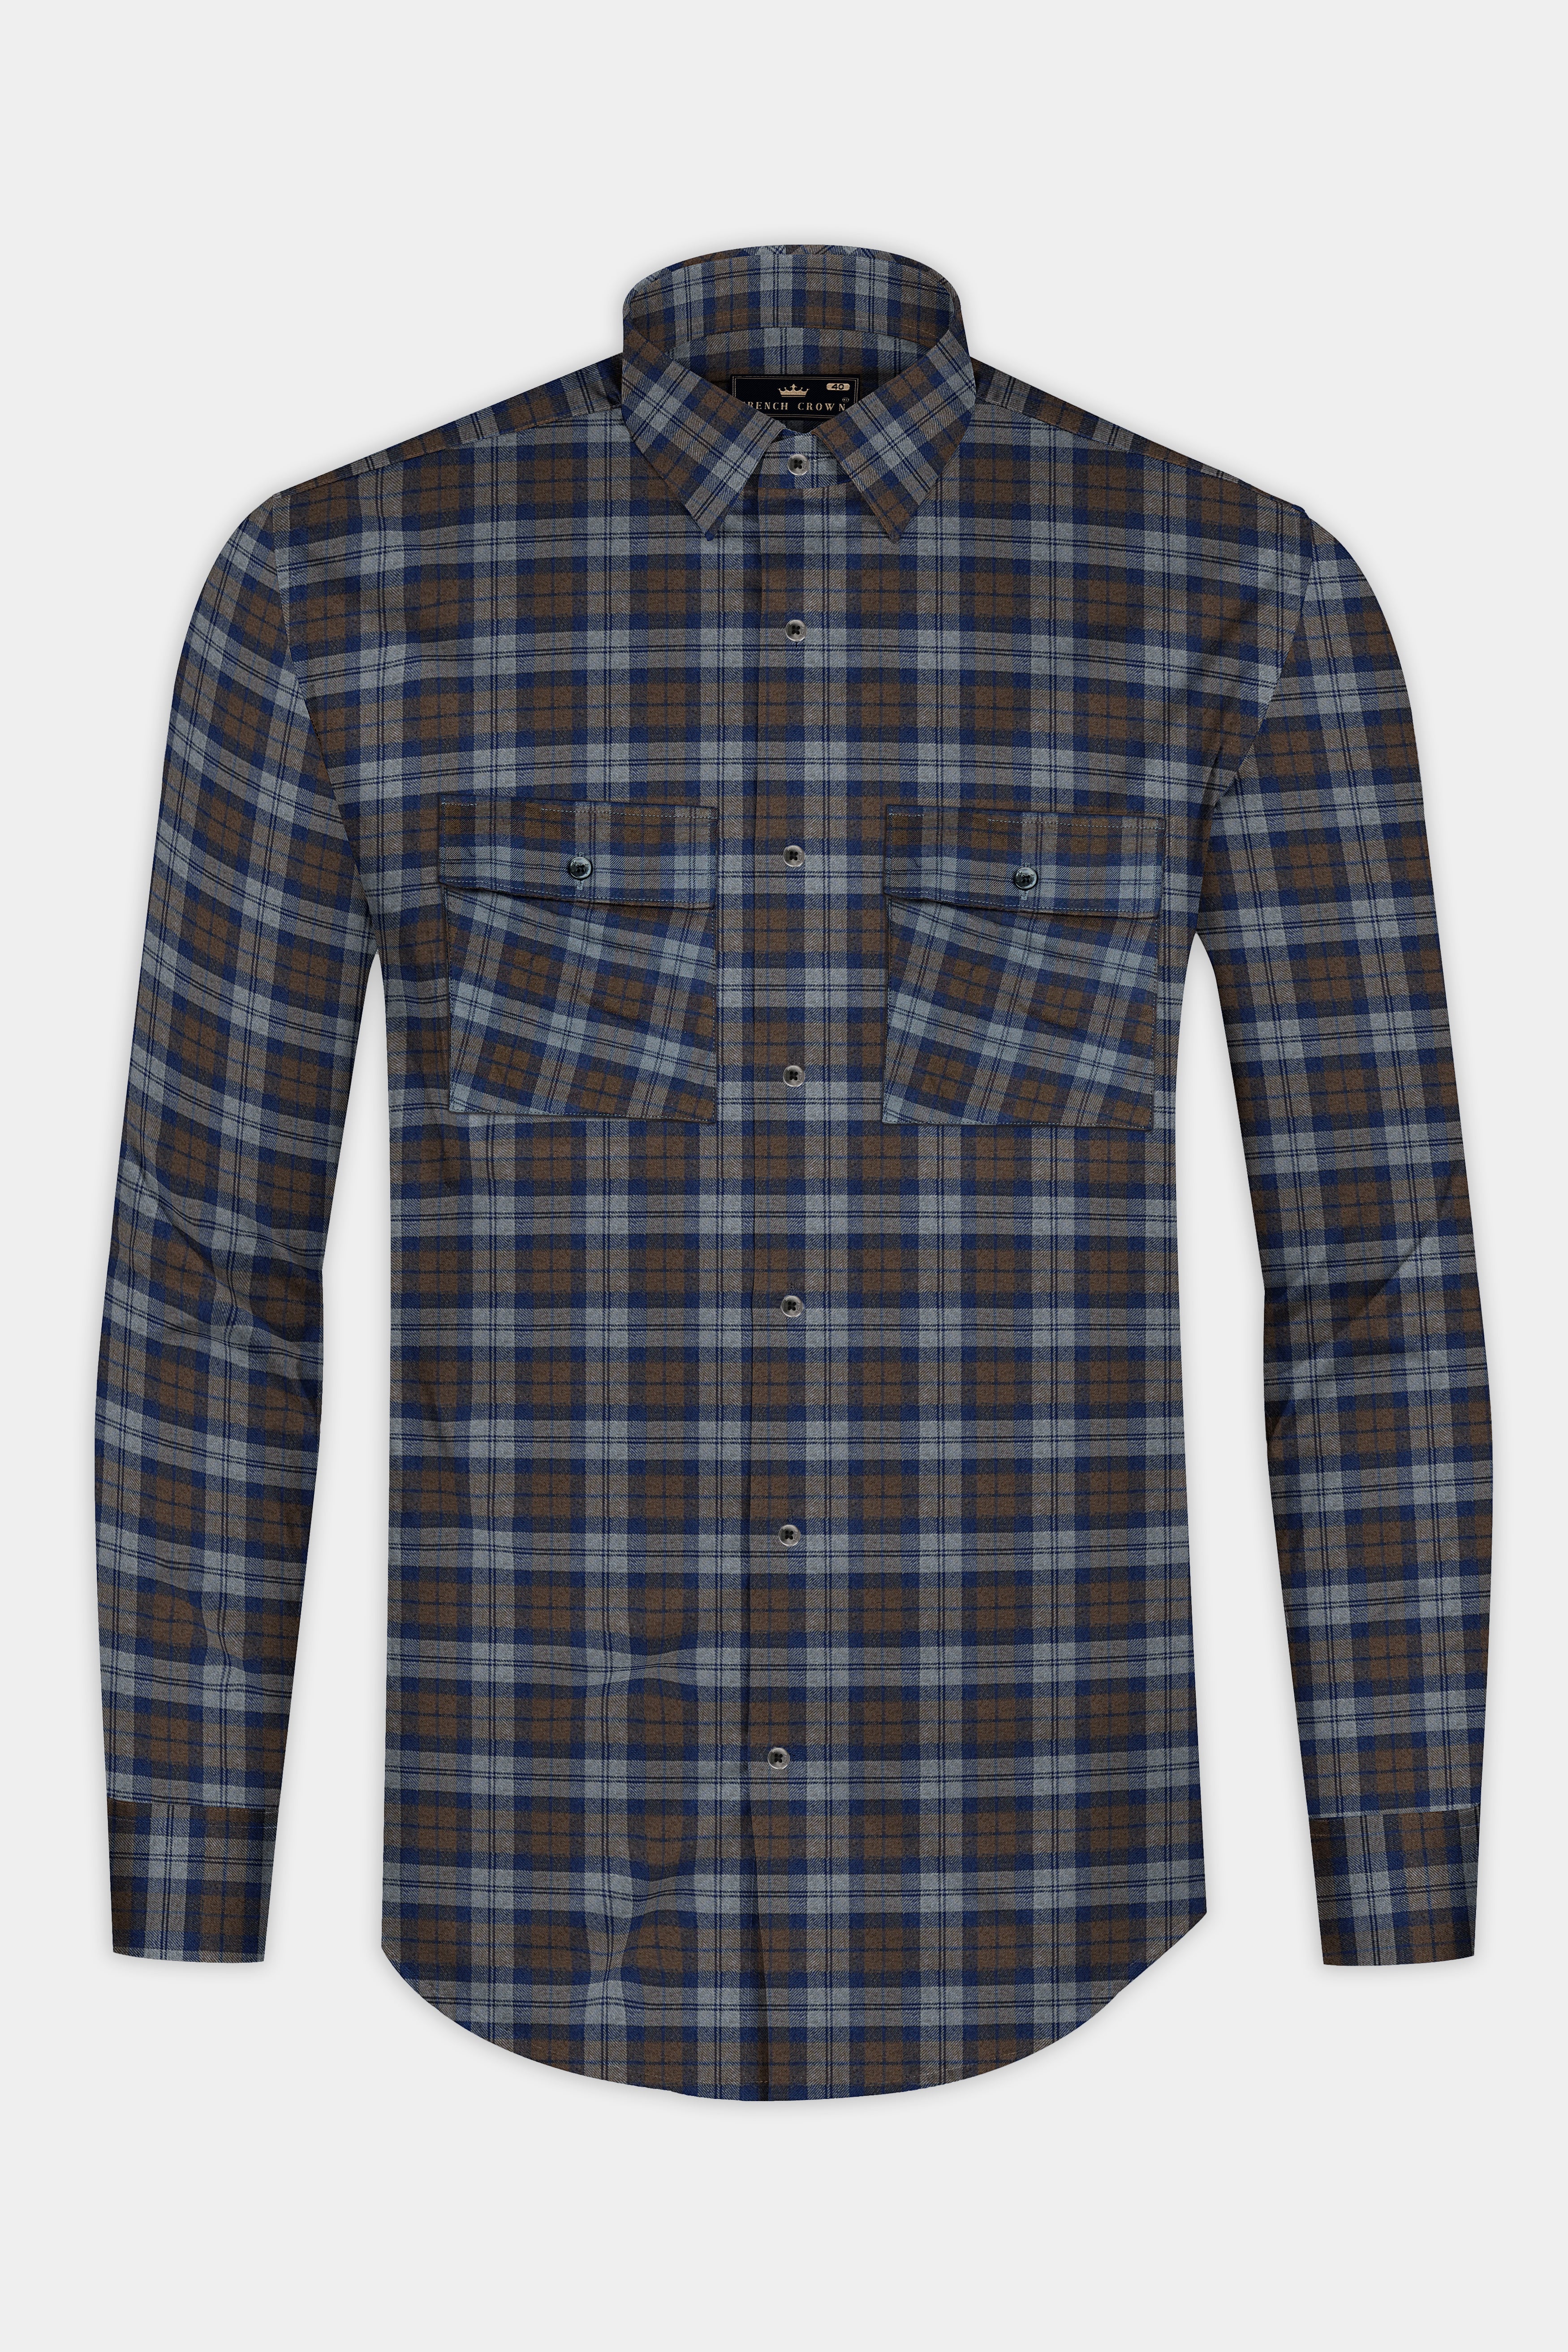 Iroko Brown With Firefly Plaid Twill Cotton Shirt